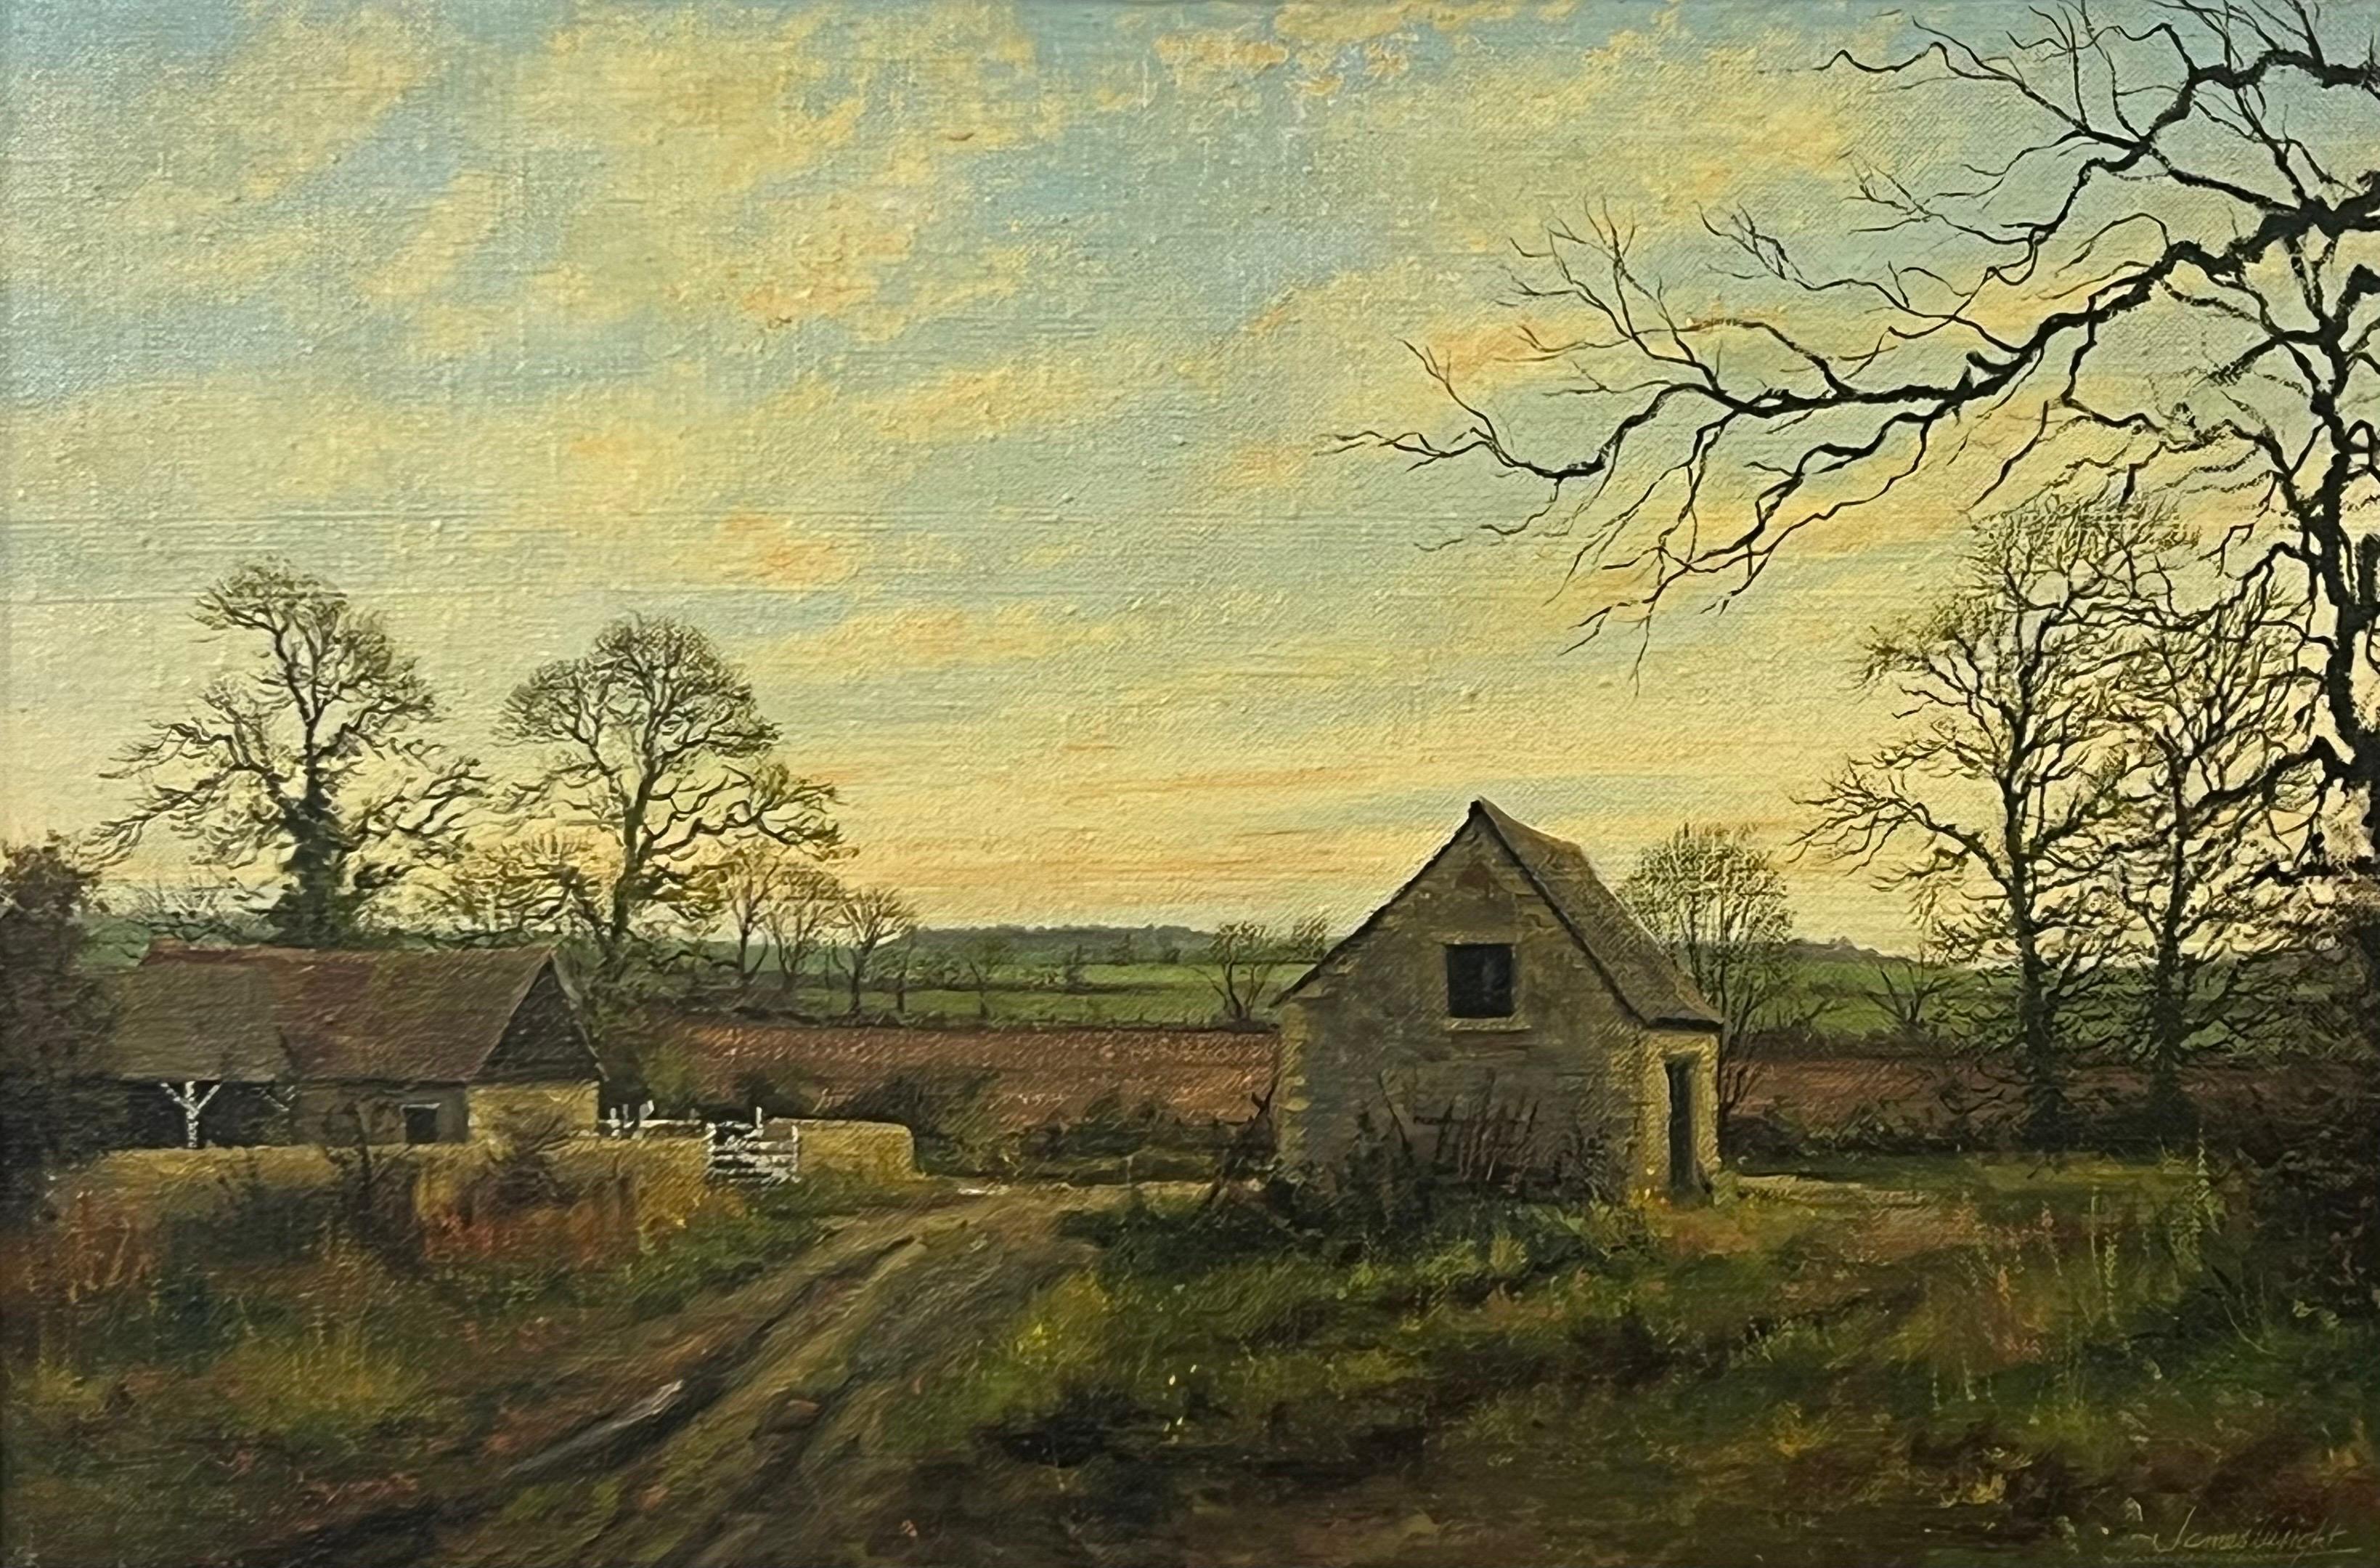 Old Barn Scene of a Farm in the English Countryside by British Landscape Artist - Painting by James Wright